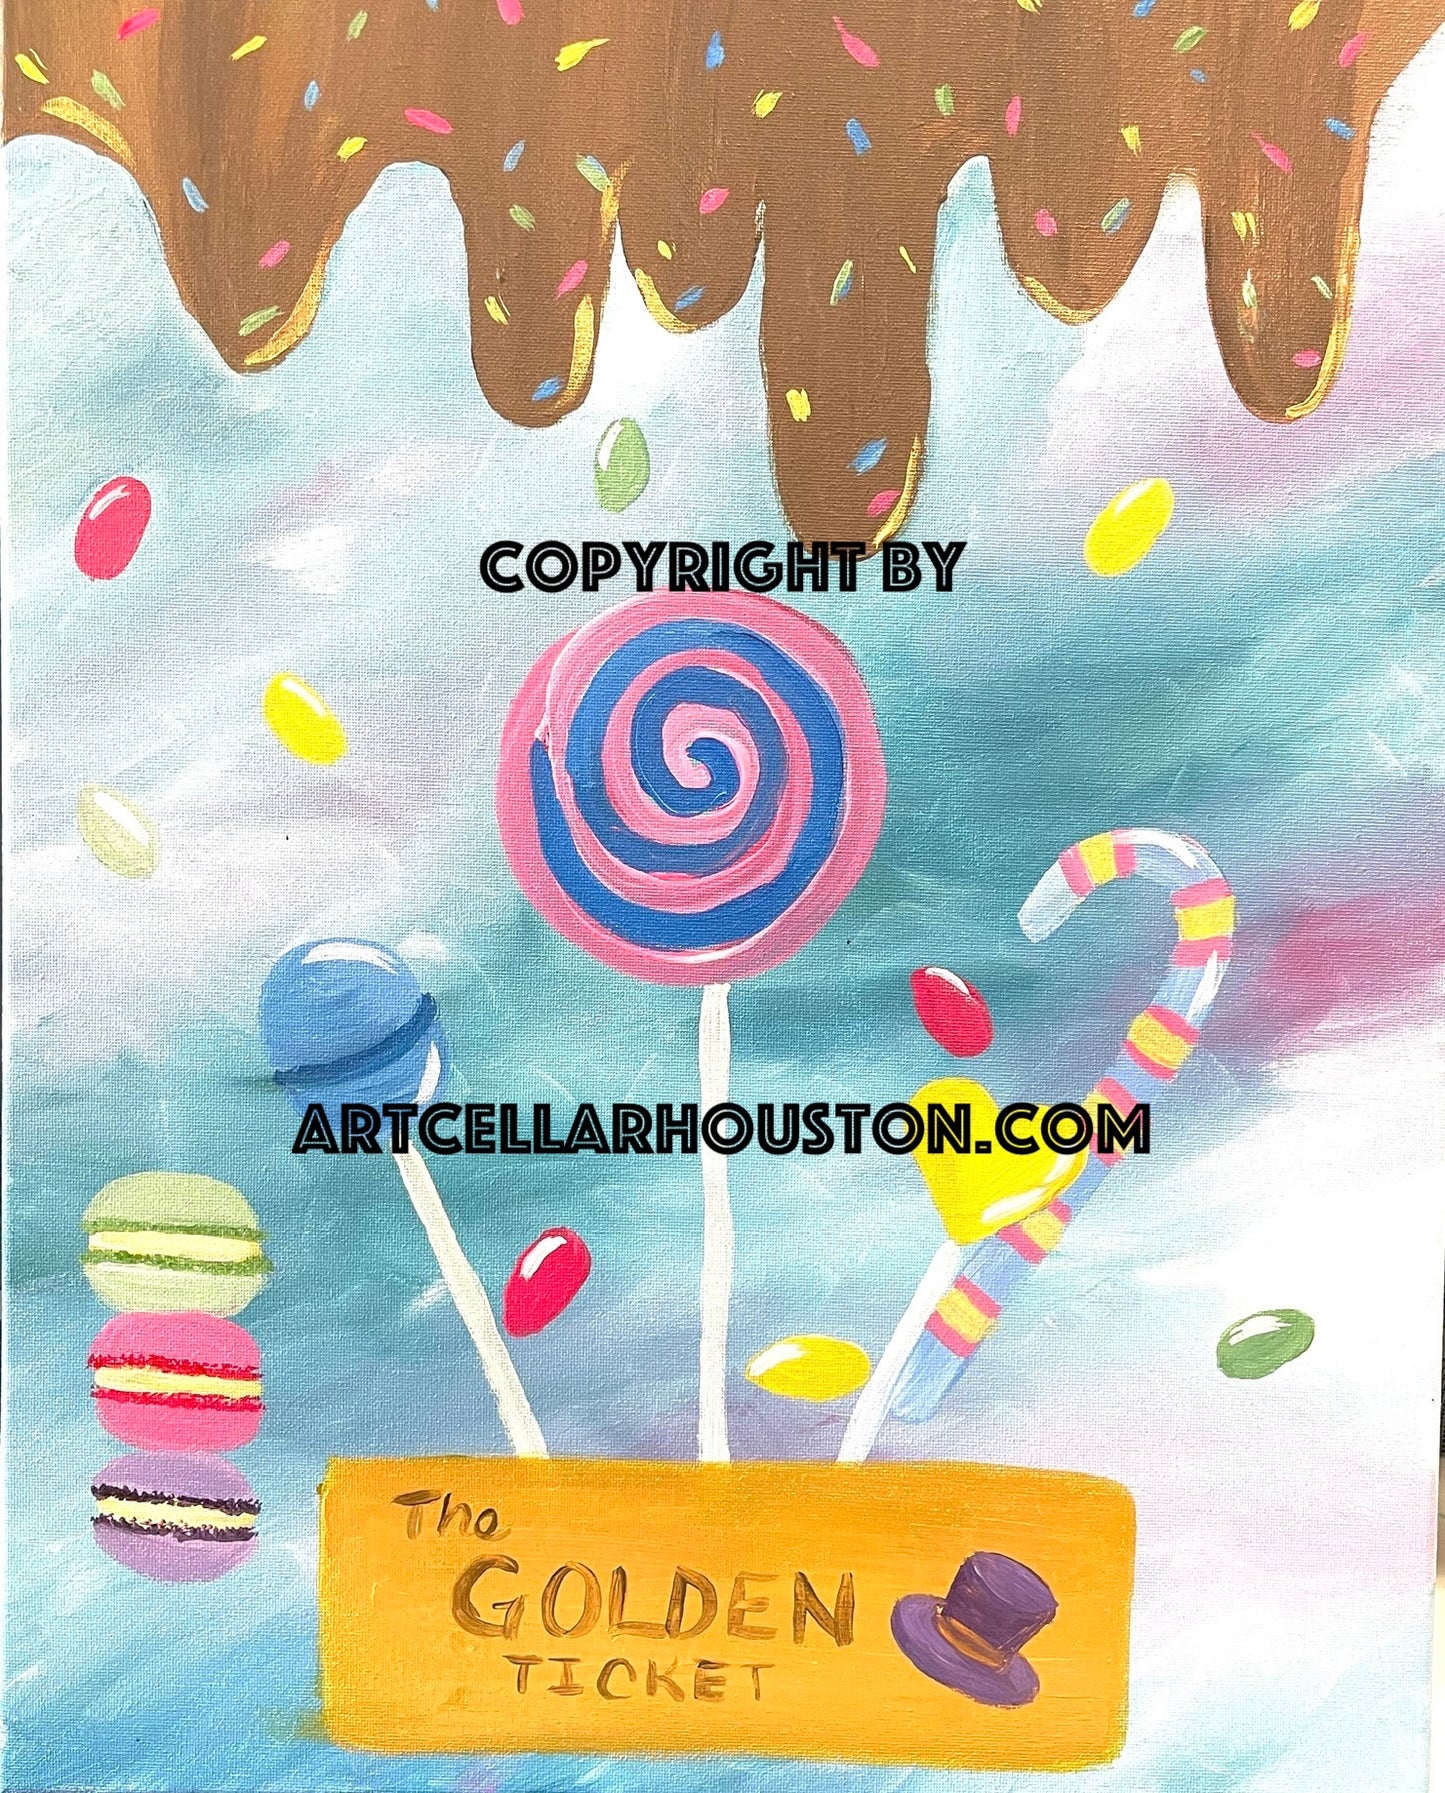 Sat, Sep 9th, 3-5P "Chocolate Factory" PRIVATE Houston Kids Paint Party